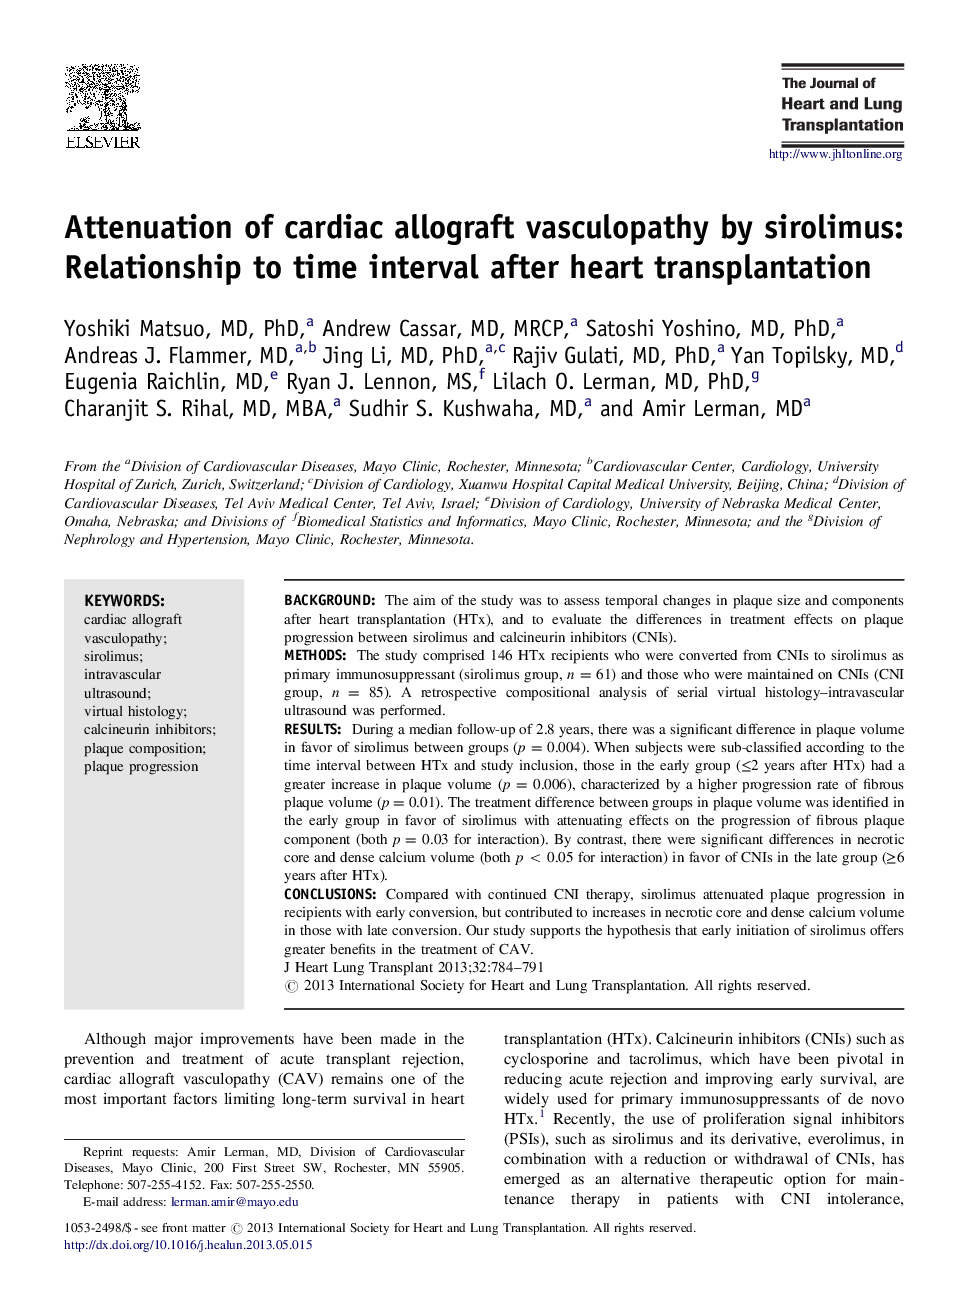 Attenuation of cardiac allograft vasculopathy by sirolimus: Relationship to time interval after heart transplantation